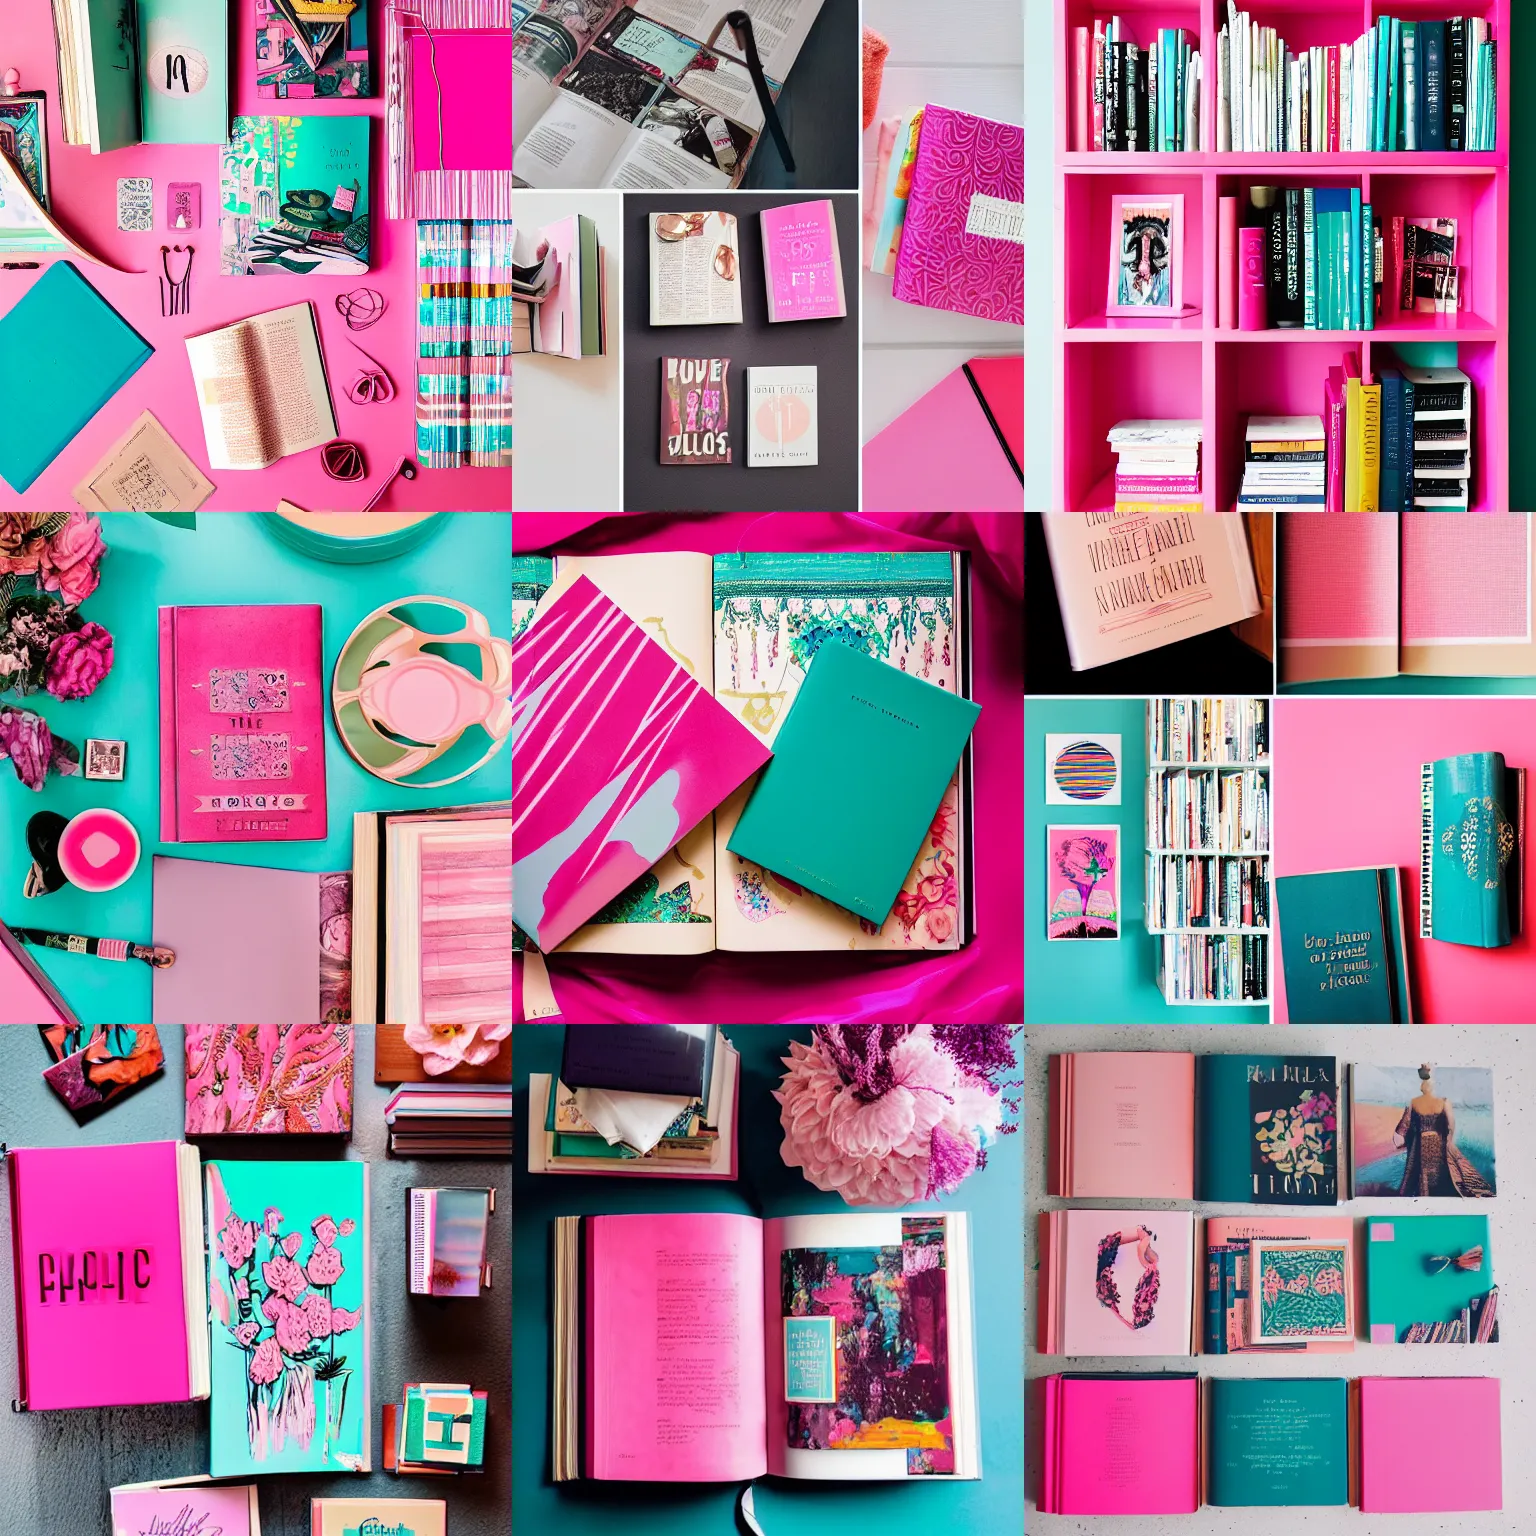 Prompt: flatlay book collection, vivid colors, dramatic lighting, pink and teal